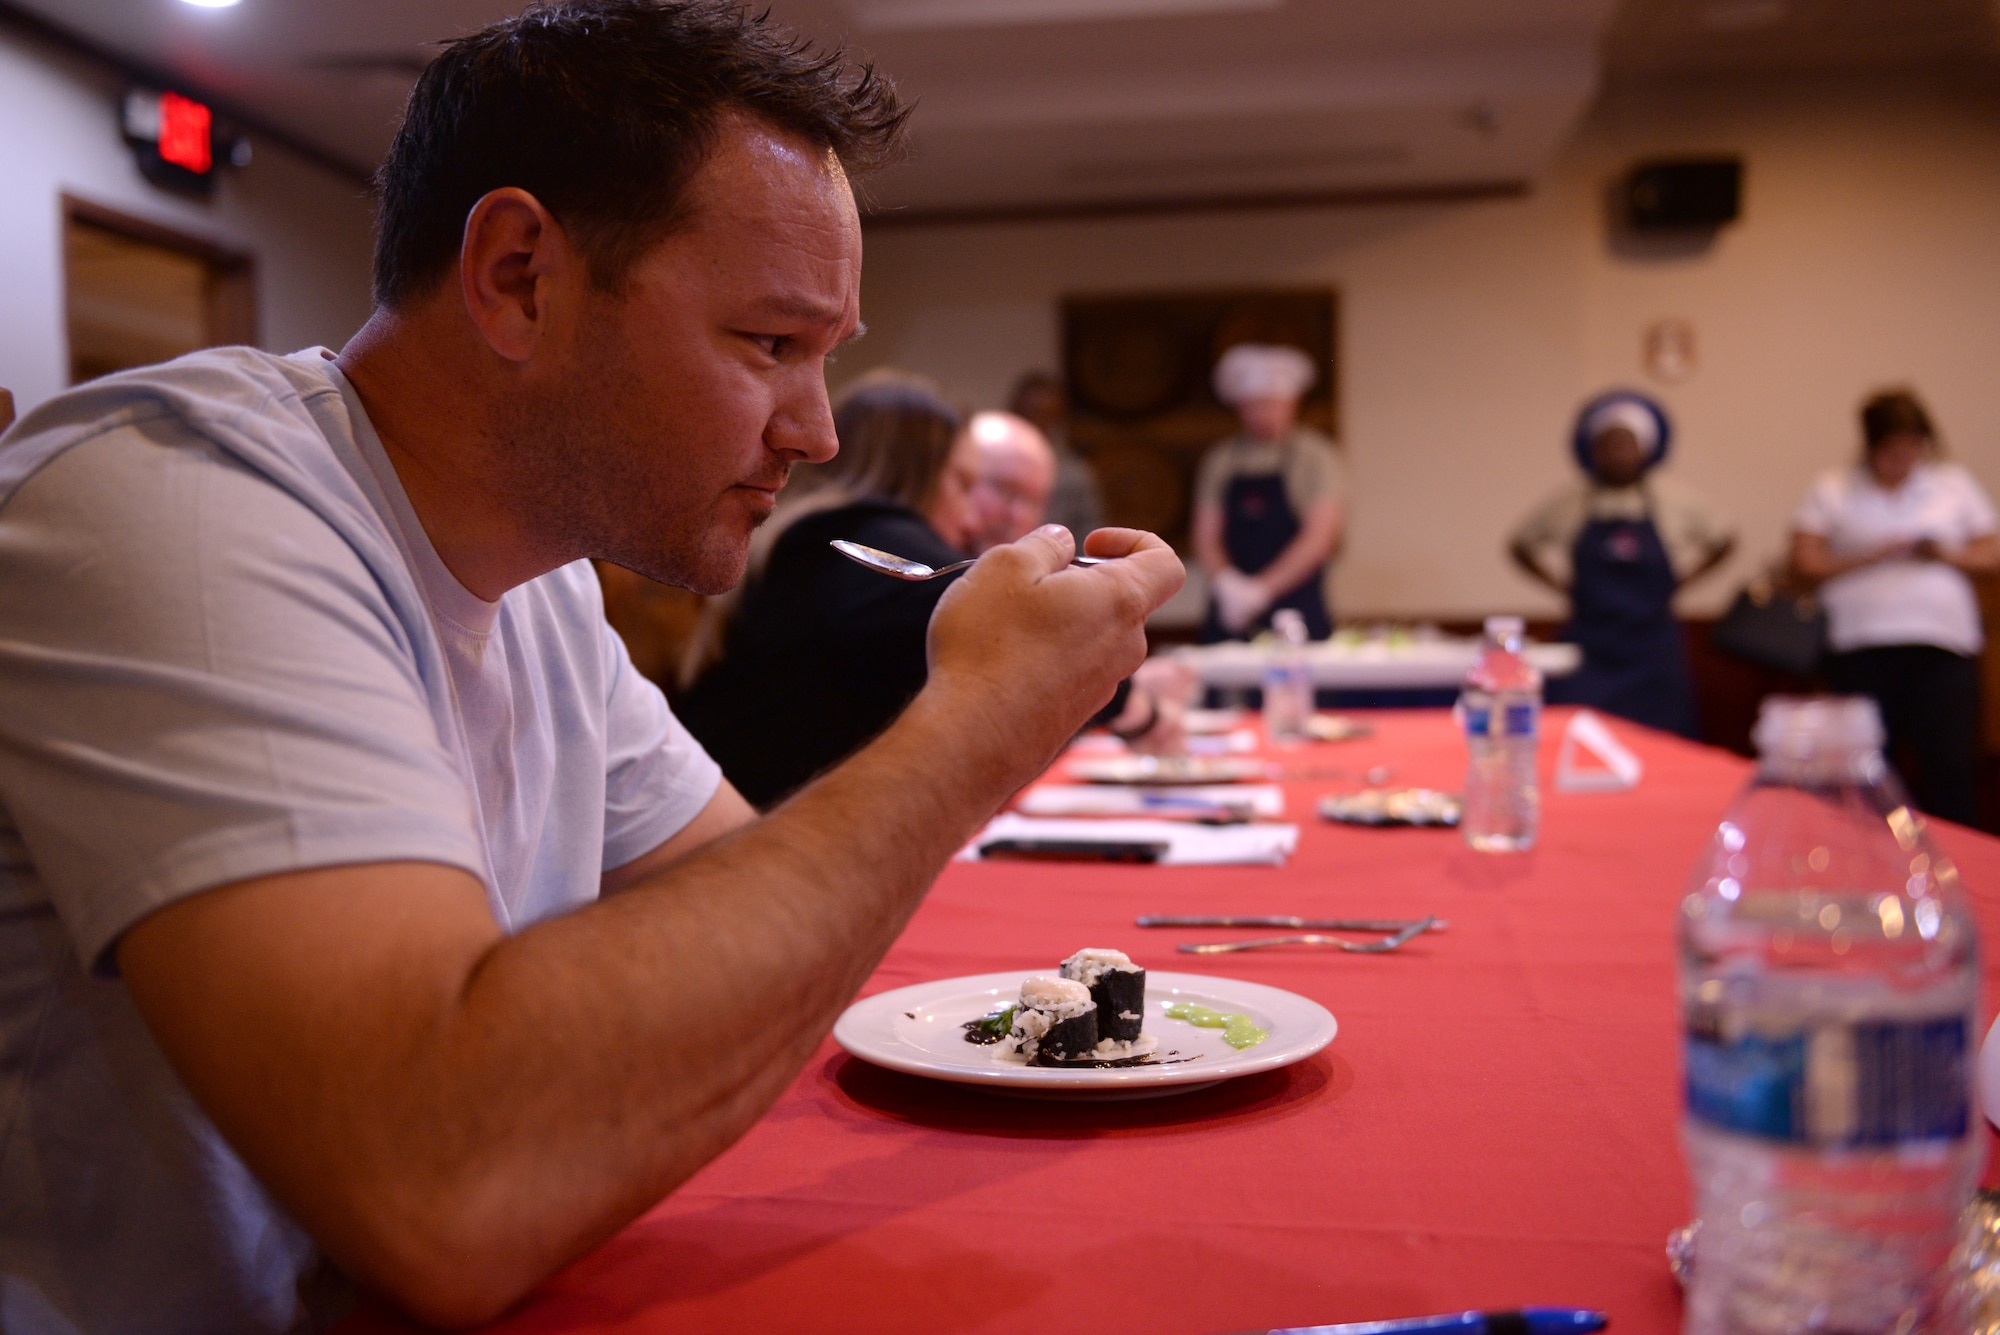 Joe Lucidi, a local restaurant owner, judges an appetizer during the Taste of Luke cooking competition at Luke Air Force Base, Ariz., May 9, 2018. Lucidi was one of three guest judges, the other two were also from local restaurants. (U.S. Air Force photo by Senior Airman Ridge Shan)